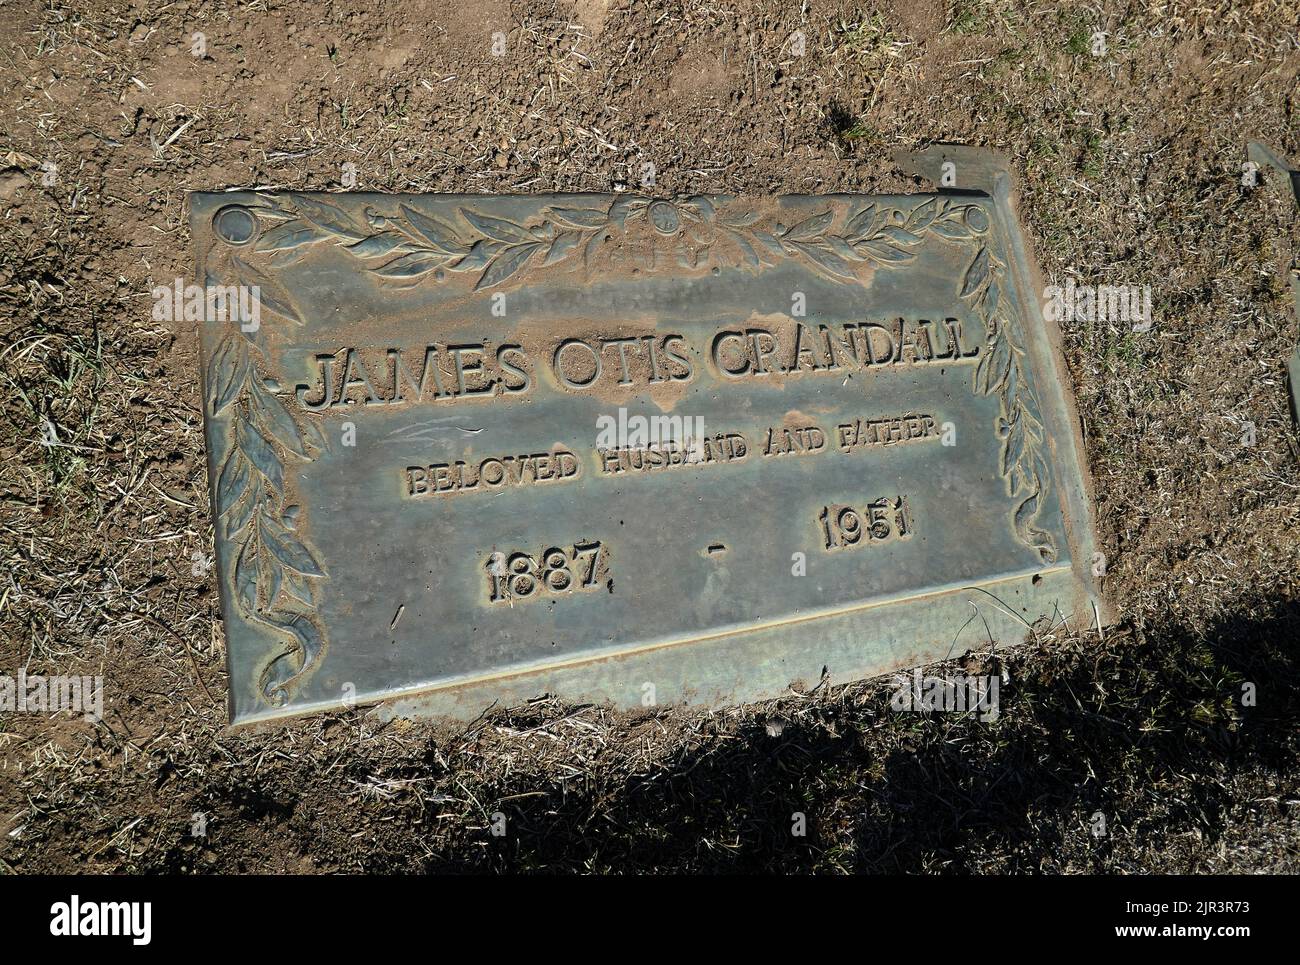 Inglewood, California, USA 19th August 2022 Baseball Player James Otis 'Doc' Crandall's Grave in Nignonette Section at Inglewood Park Cemetery on August 19, 2022 in Inglewood, Los Angeles, California, USA. Photo by Barry King/Alamy Stock Photo Stock Photo